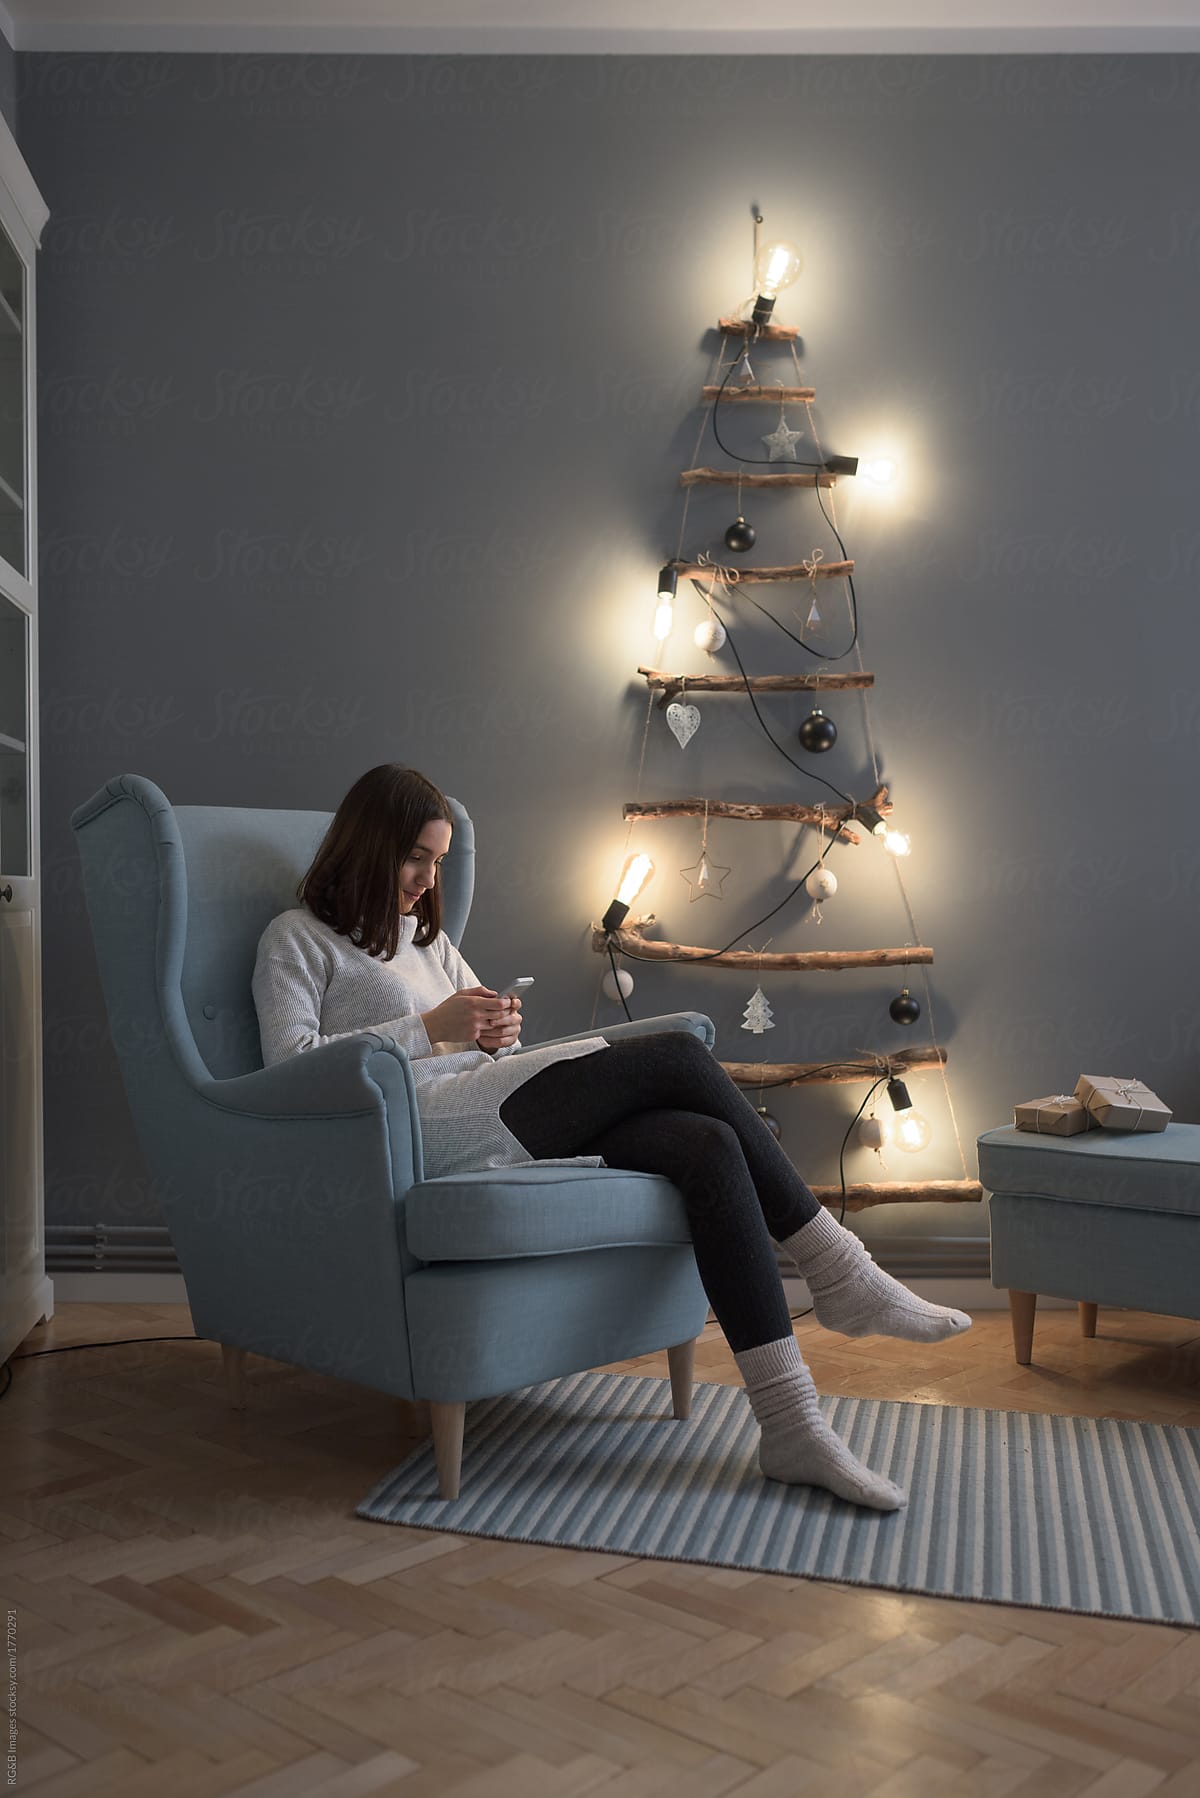 Woman relaxing in the living room by the Christmas tree